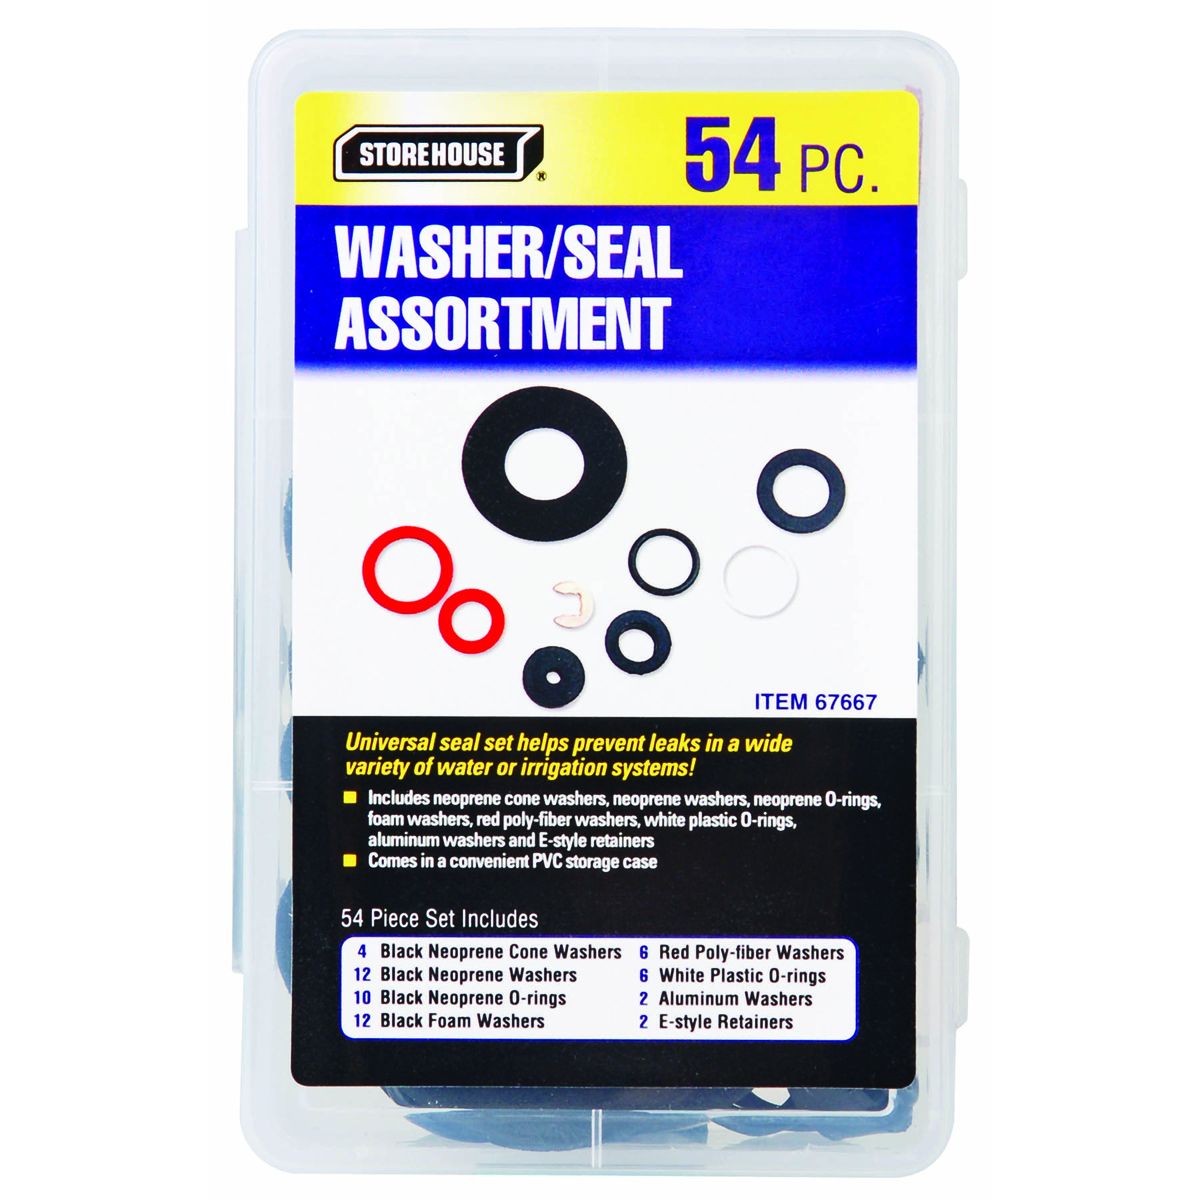 STOREHOUSE 54 Piece Washer/Seal Assortment